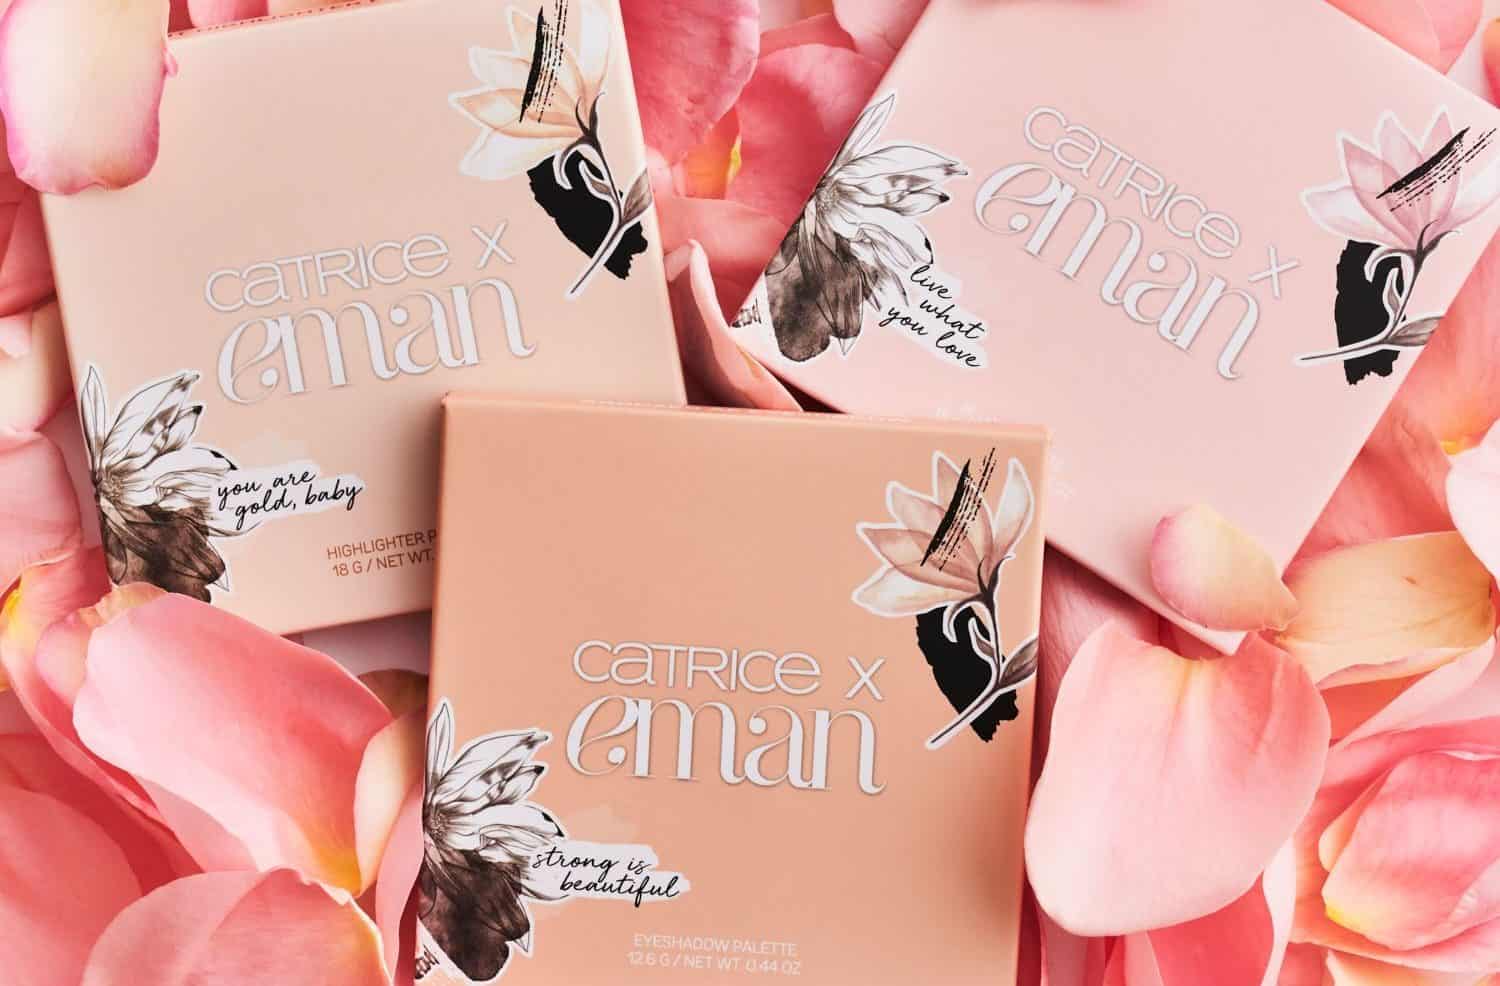 CATRICE Cosmetics Partners with EMAN, The Popular Beauty r